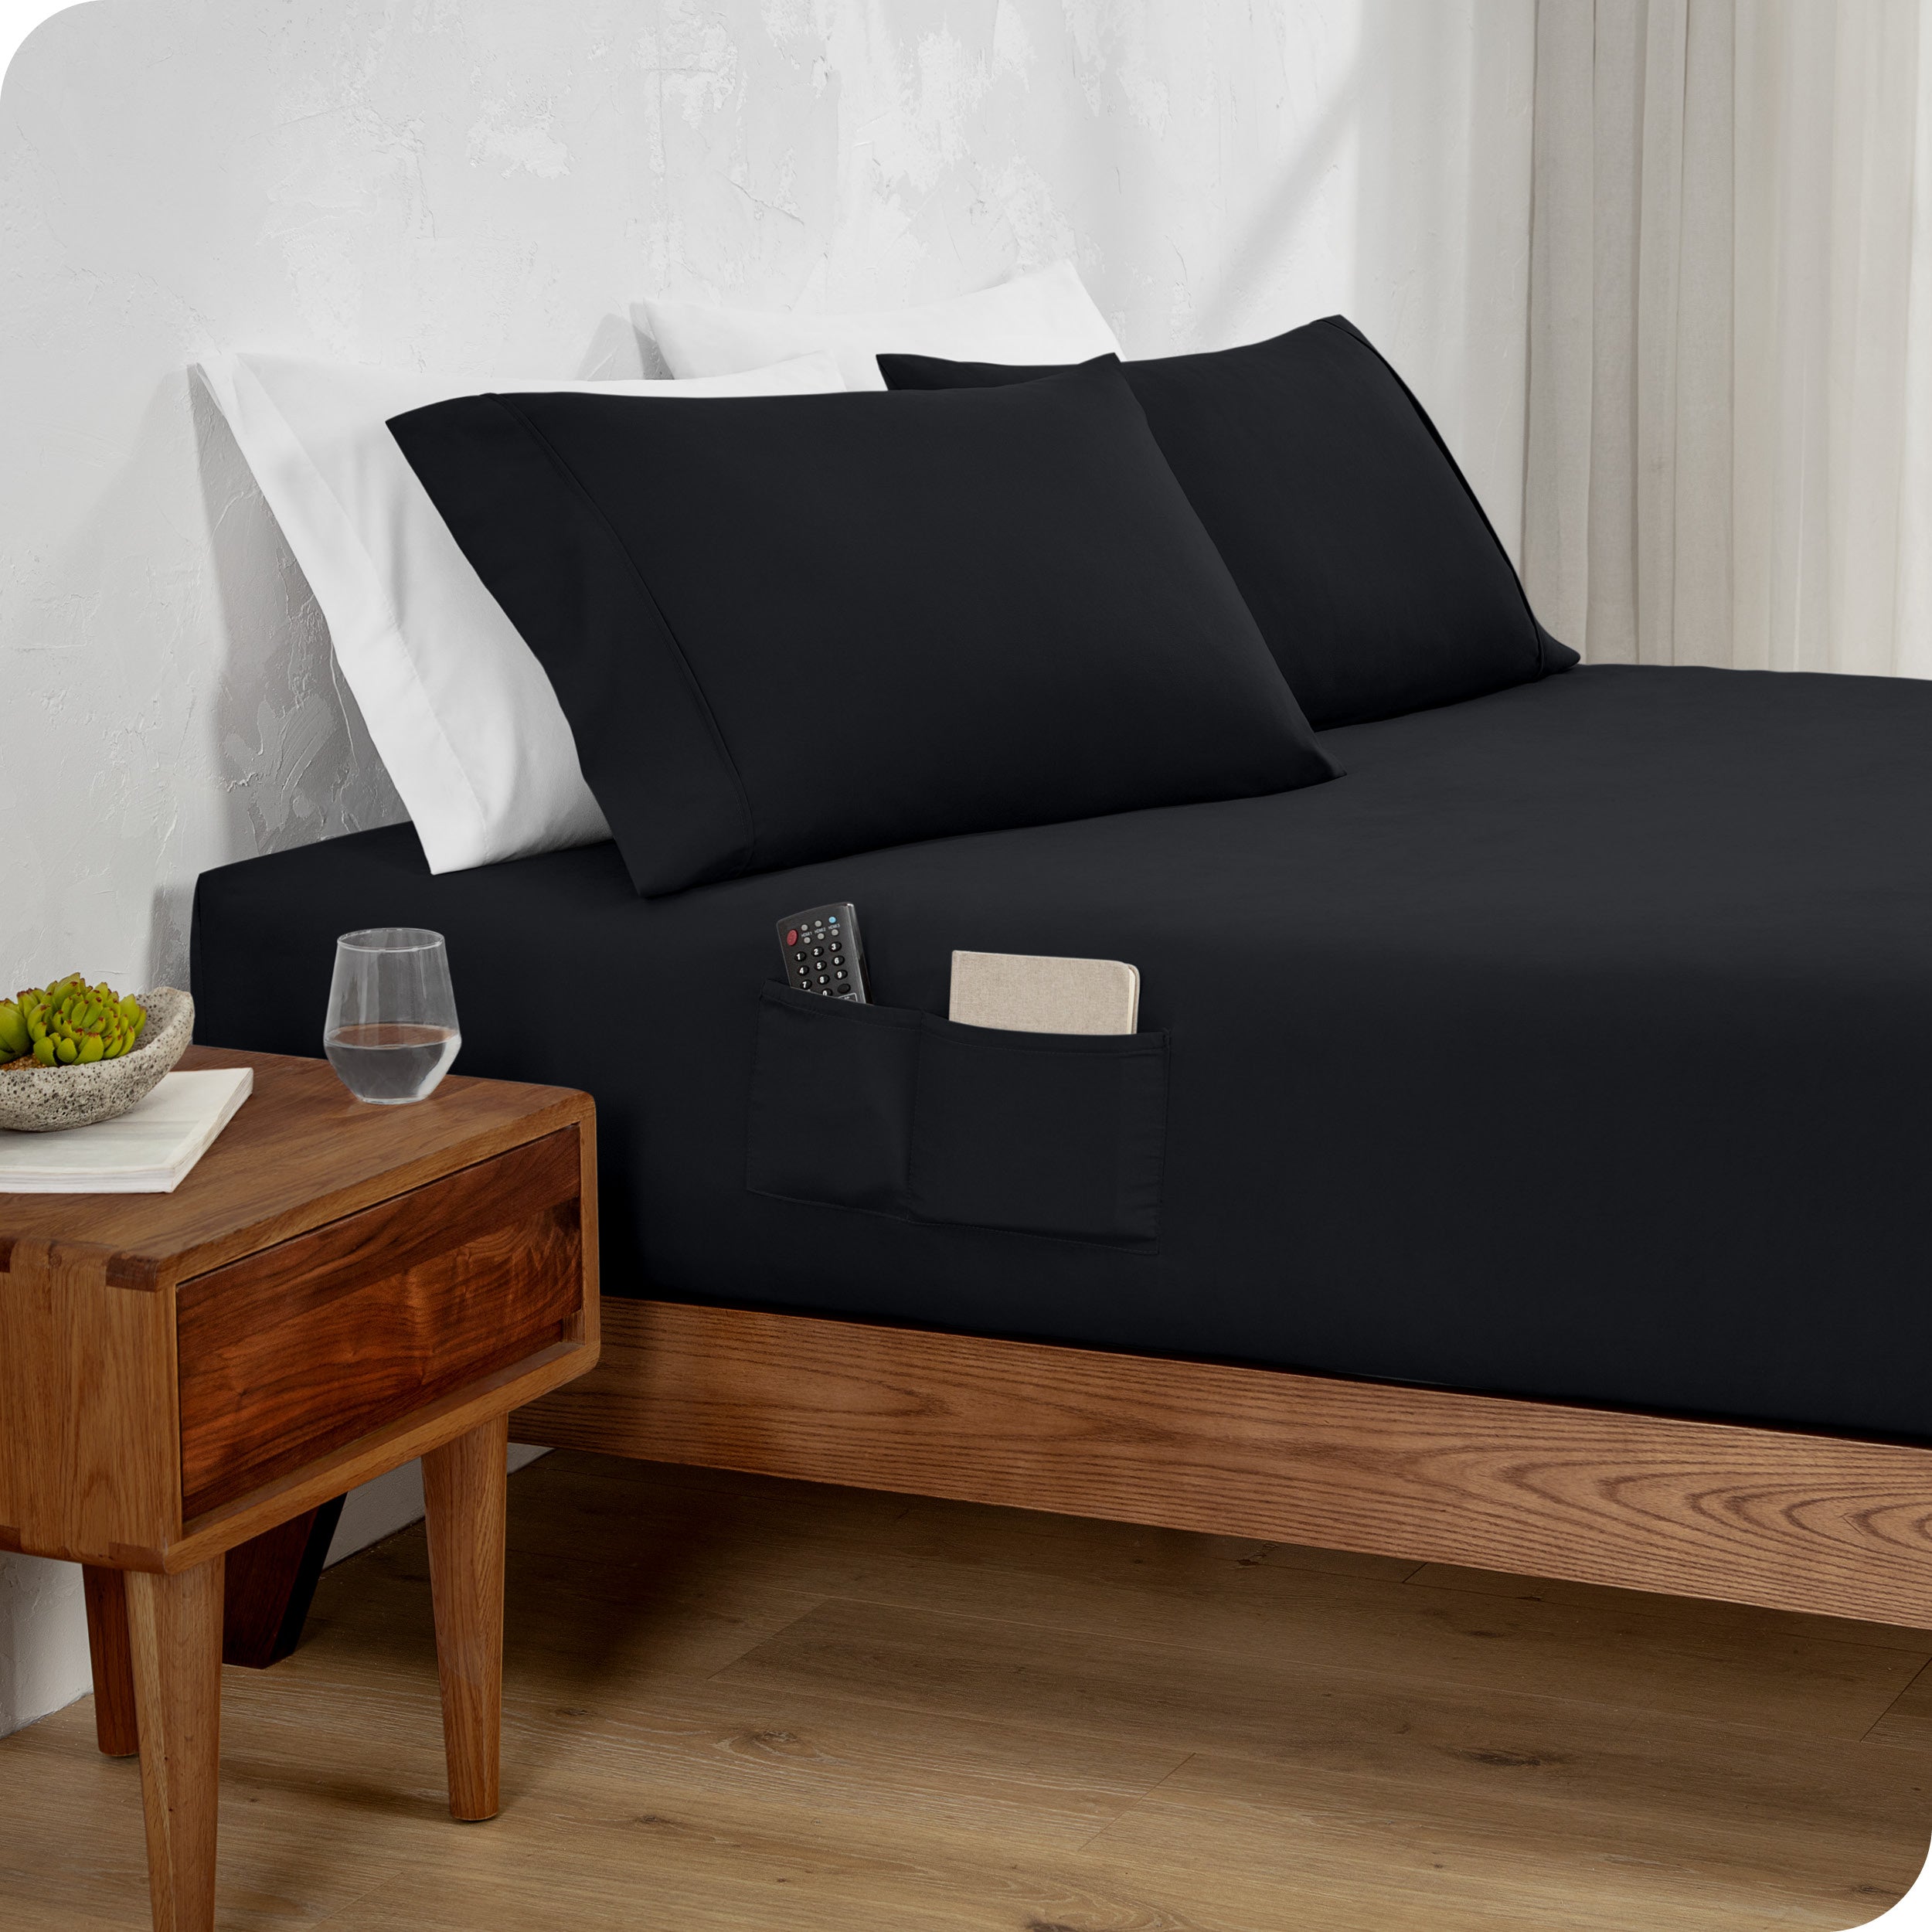 Bed made with a black fitted sheet which has pockets on the side